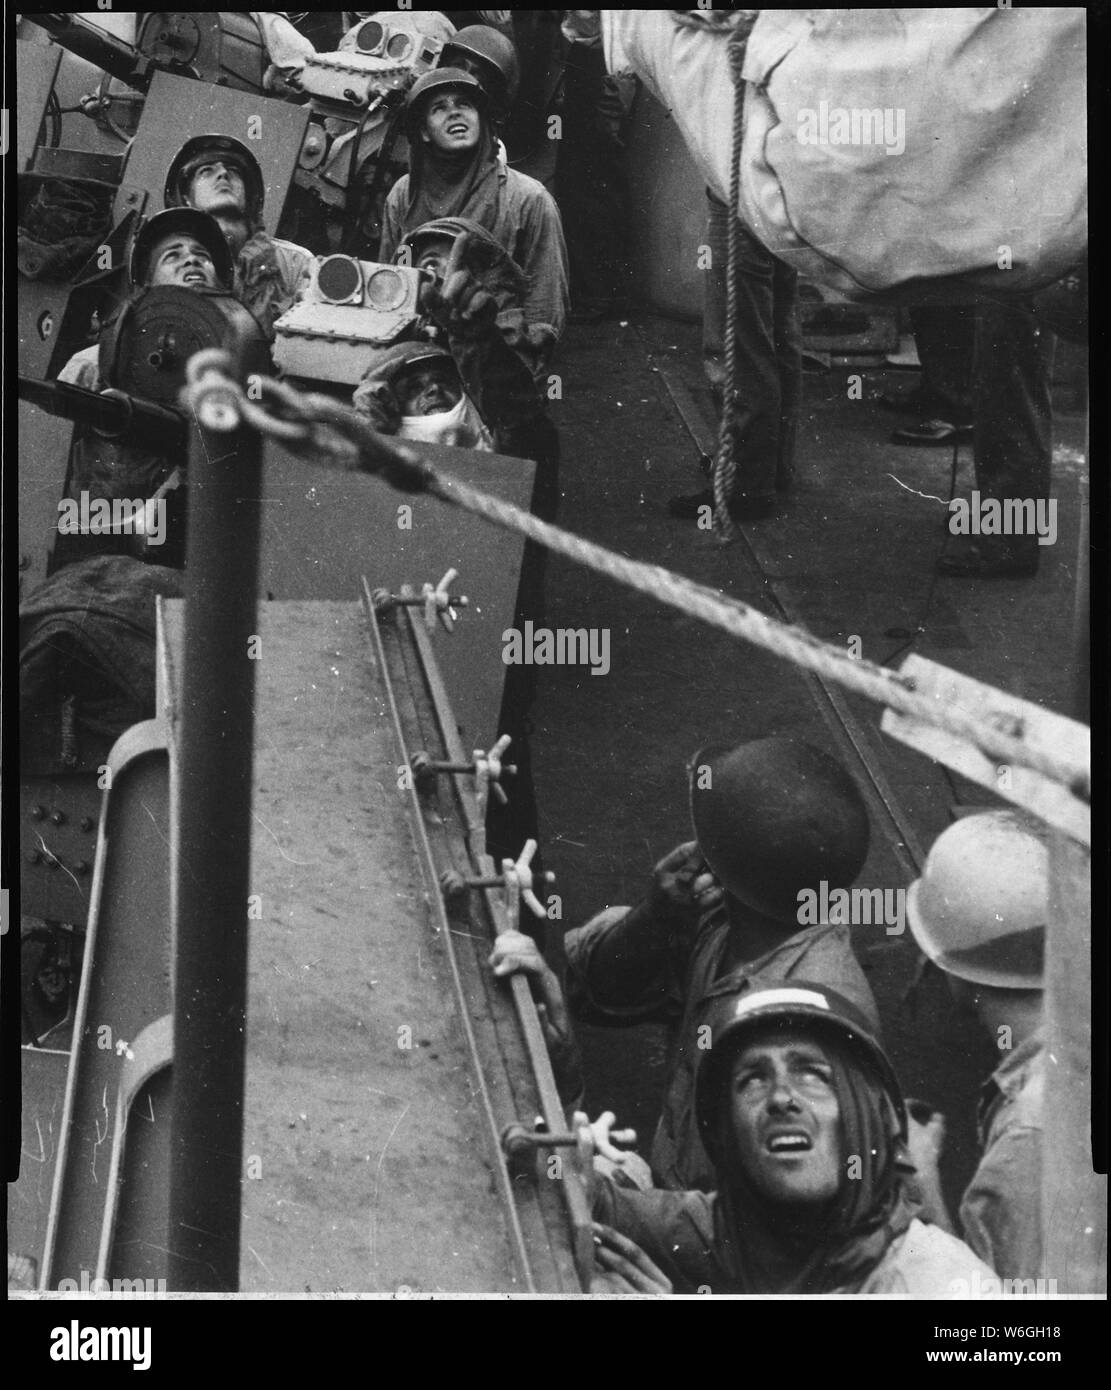 Eyes of 20mm anti-aircraft gun crews of a Navy cruiser covering the Mindoro landing, strain to spot the status of an unidentified plane overhead.; General notes:  Use War and Conflict Number 1204 when ordering a reproduction or requesting information about this image. Stock Photo